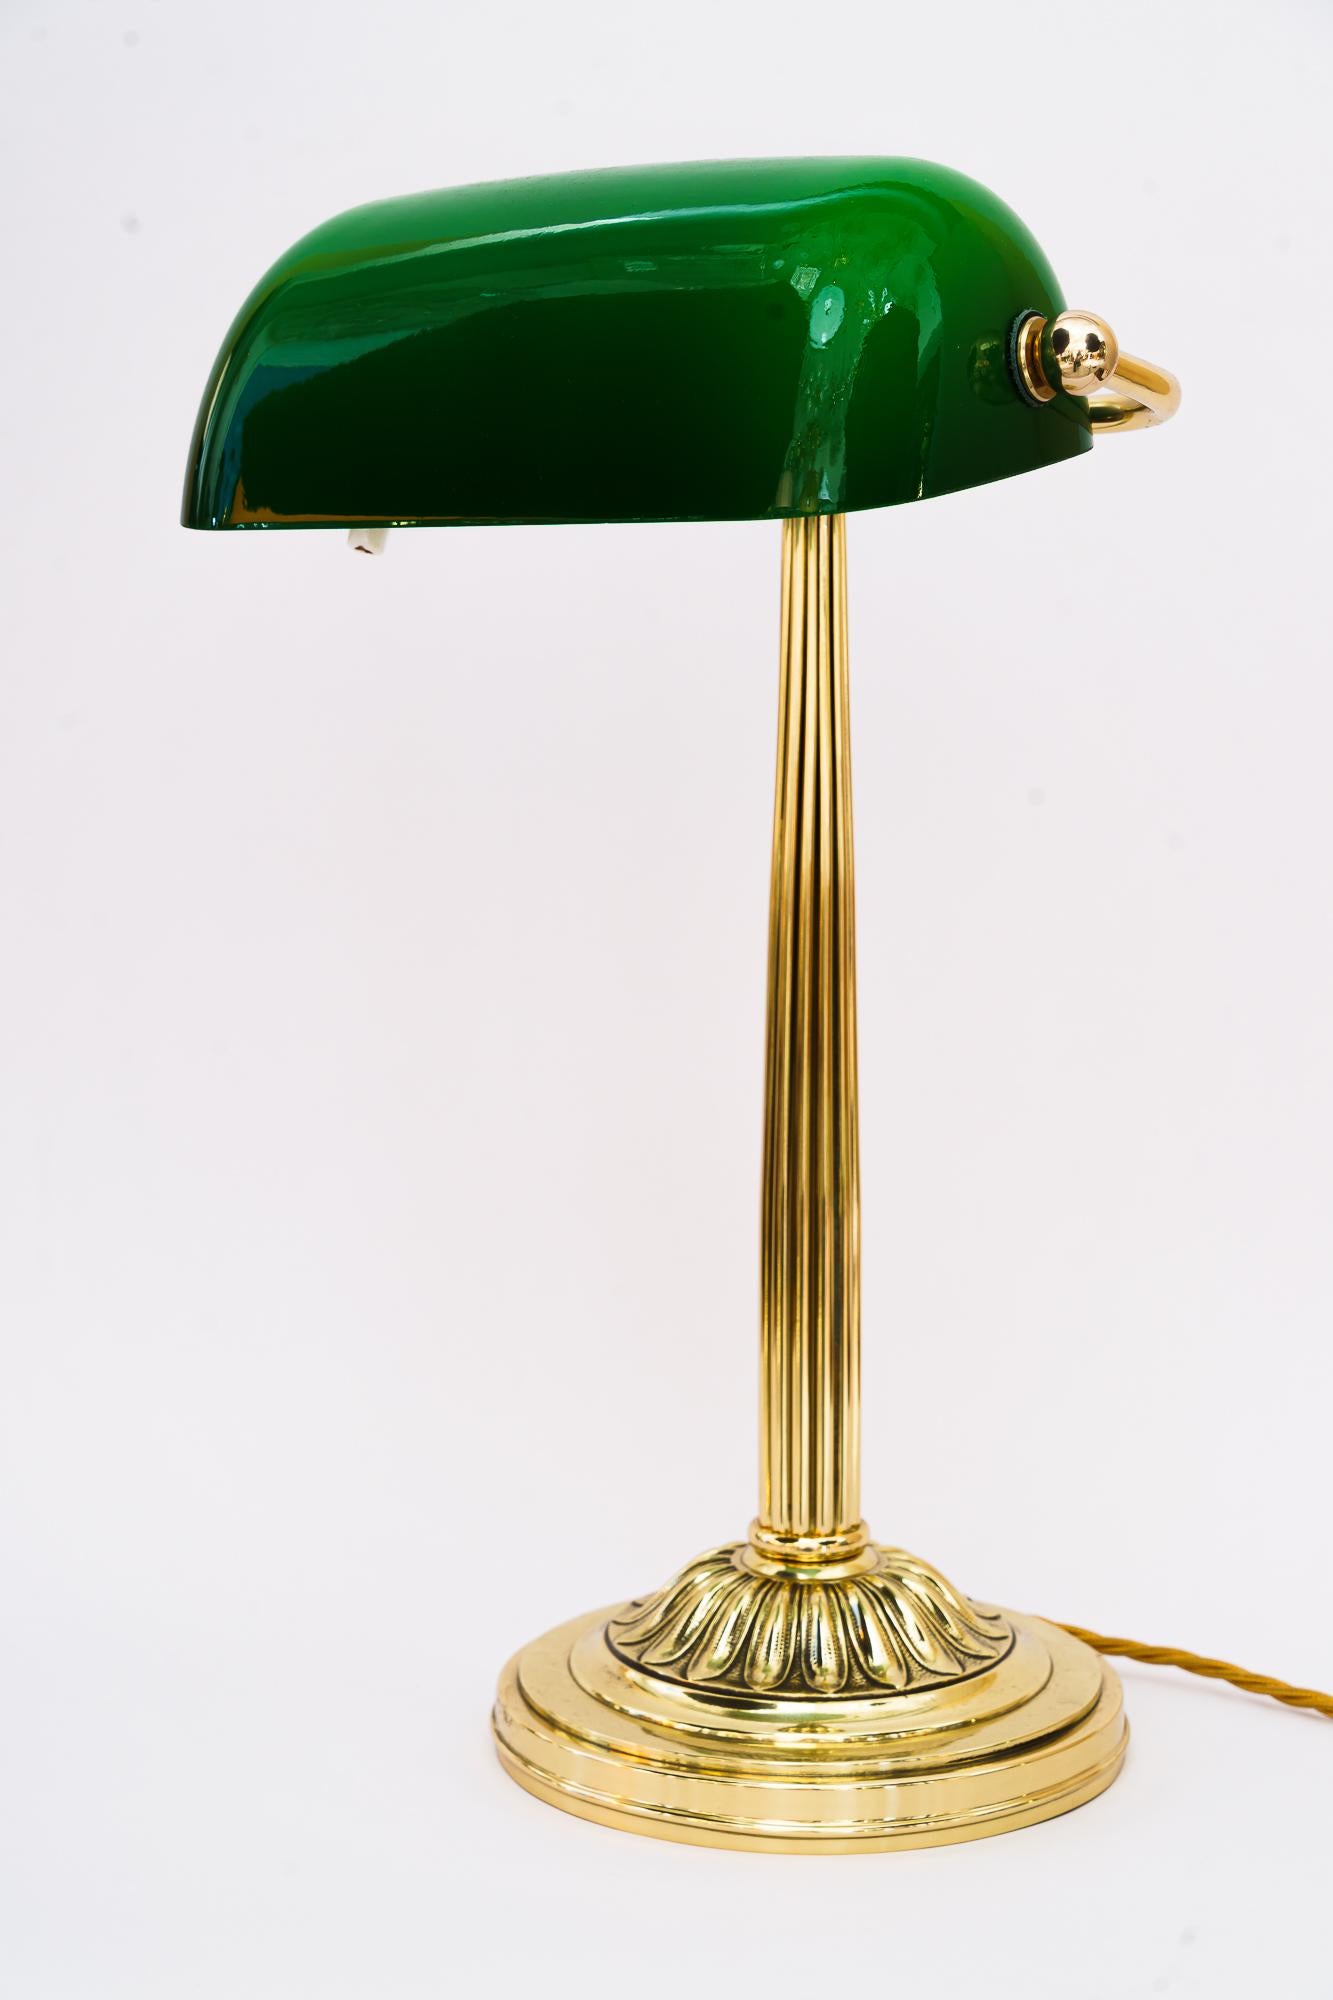 Austrian Art Deco Banker Table Lamp with Green Glass Shade Vienna Around, 1920s